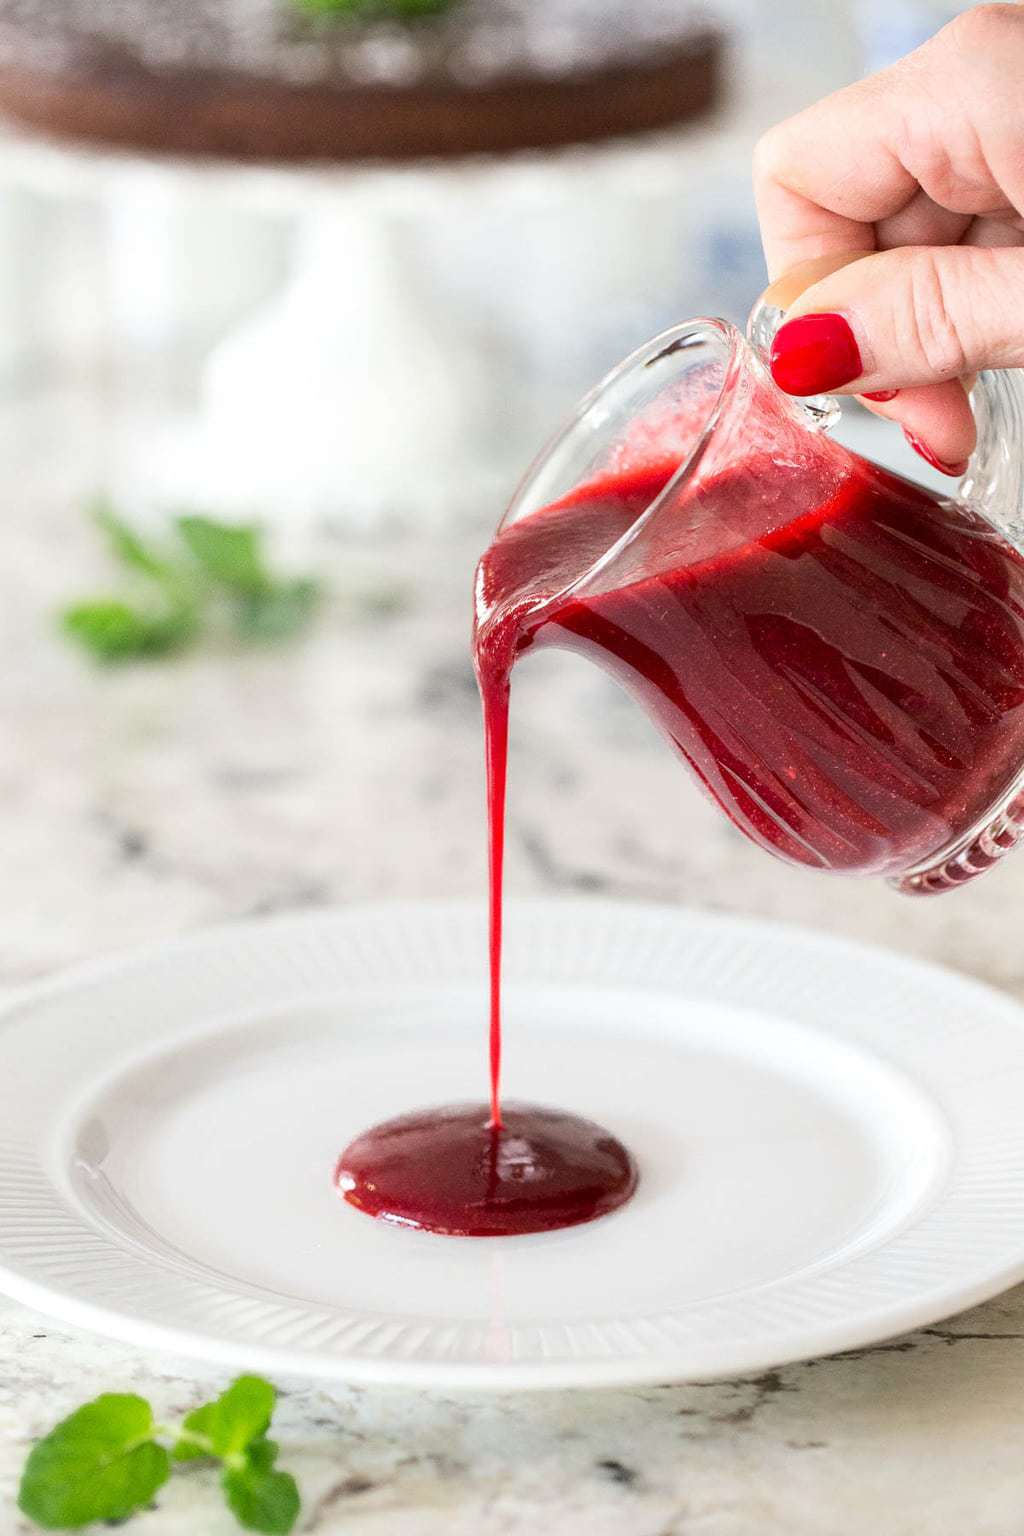 Photo of a person pouring Raspberry Coulis from a glass pitcher onto a dessert serving plate.